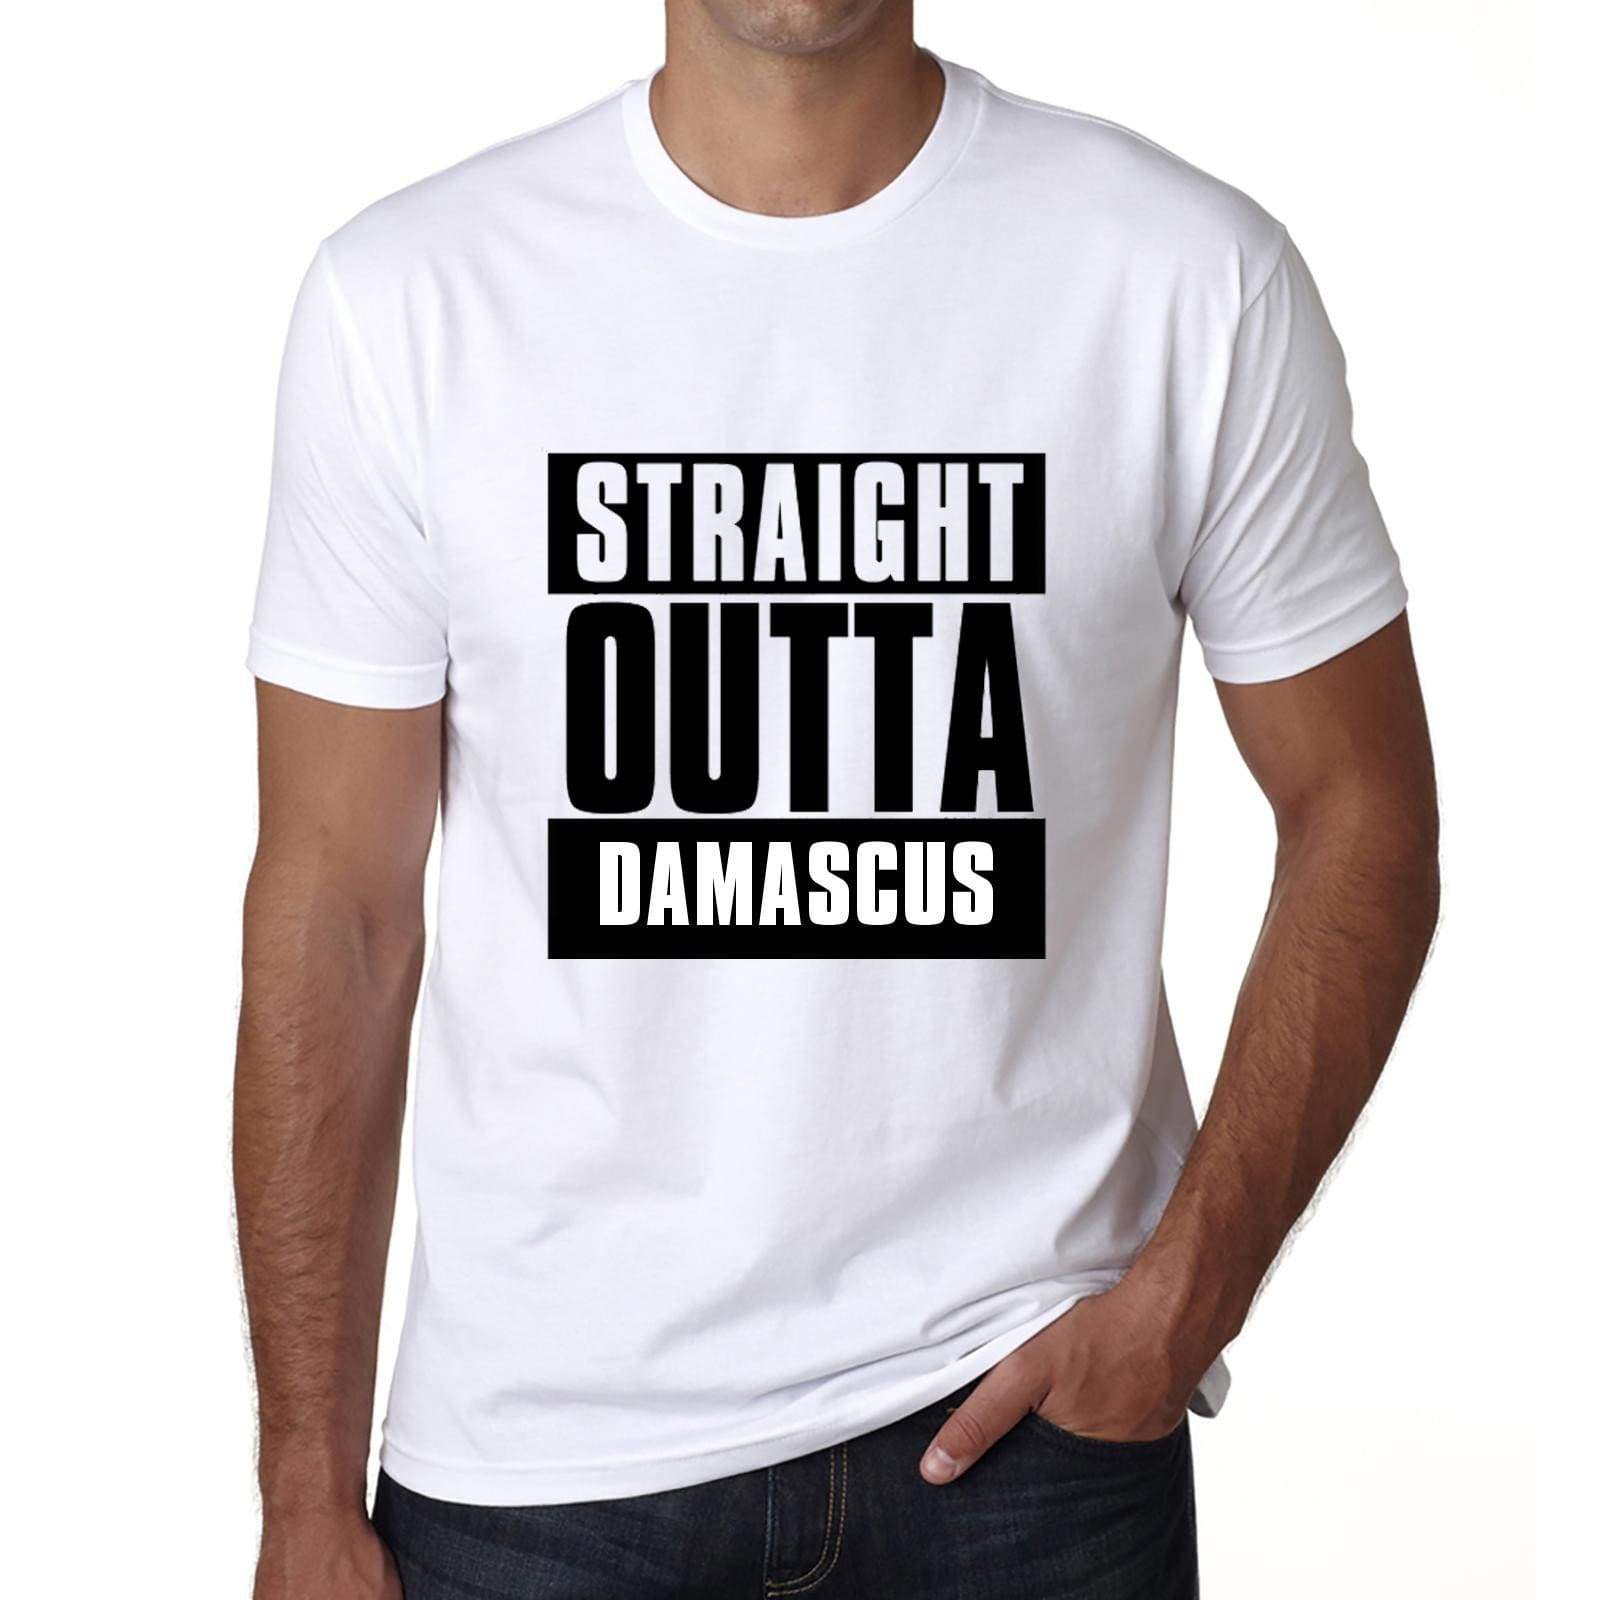 Straight Outta Damascus Mens Short Sleeve Round Neck T-Shirt 00027 - White / S - Casual